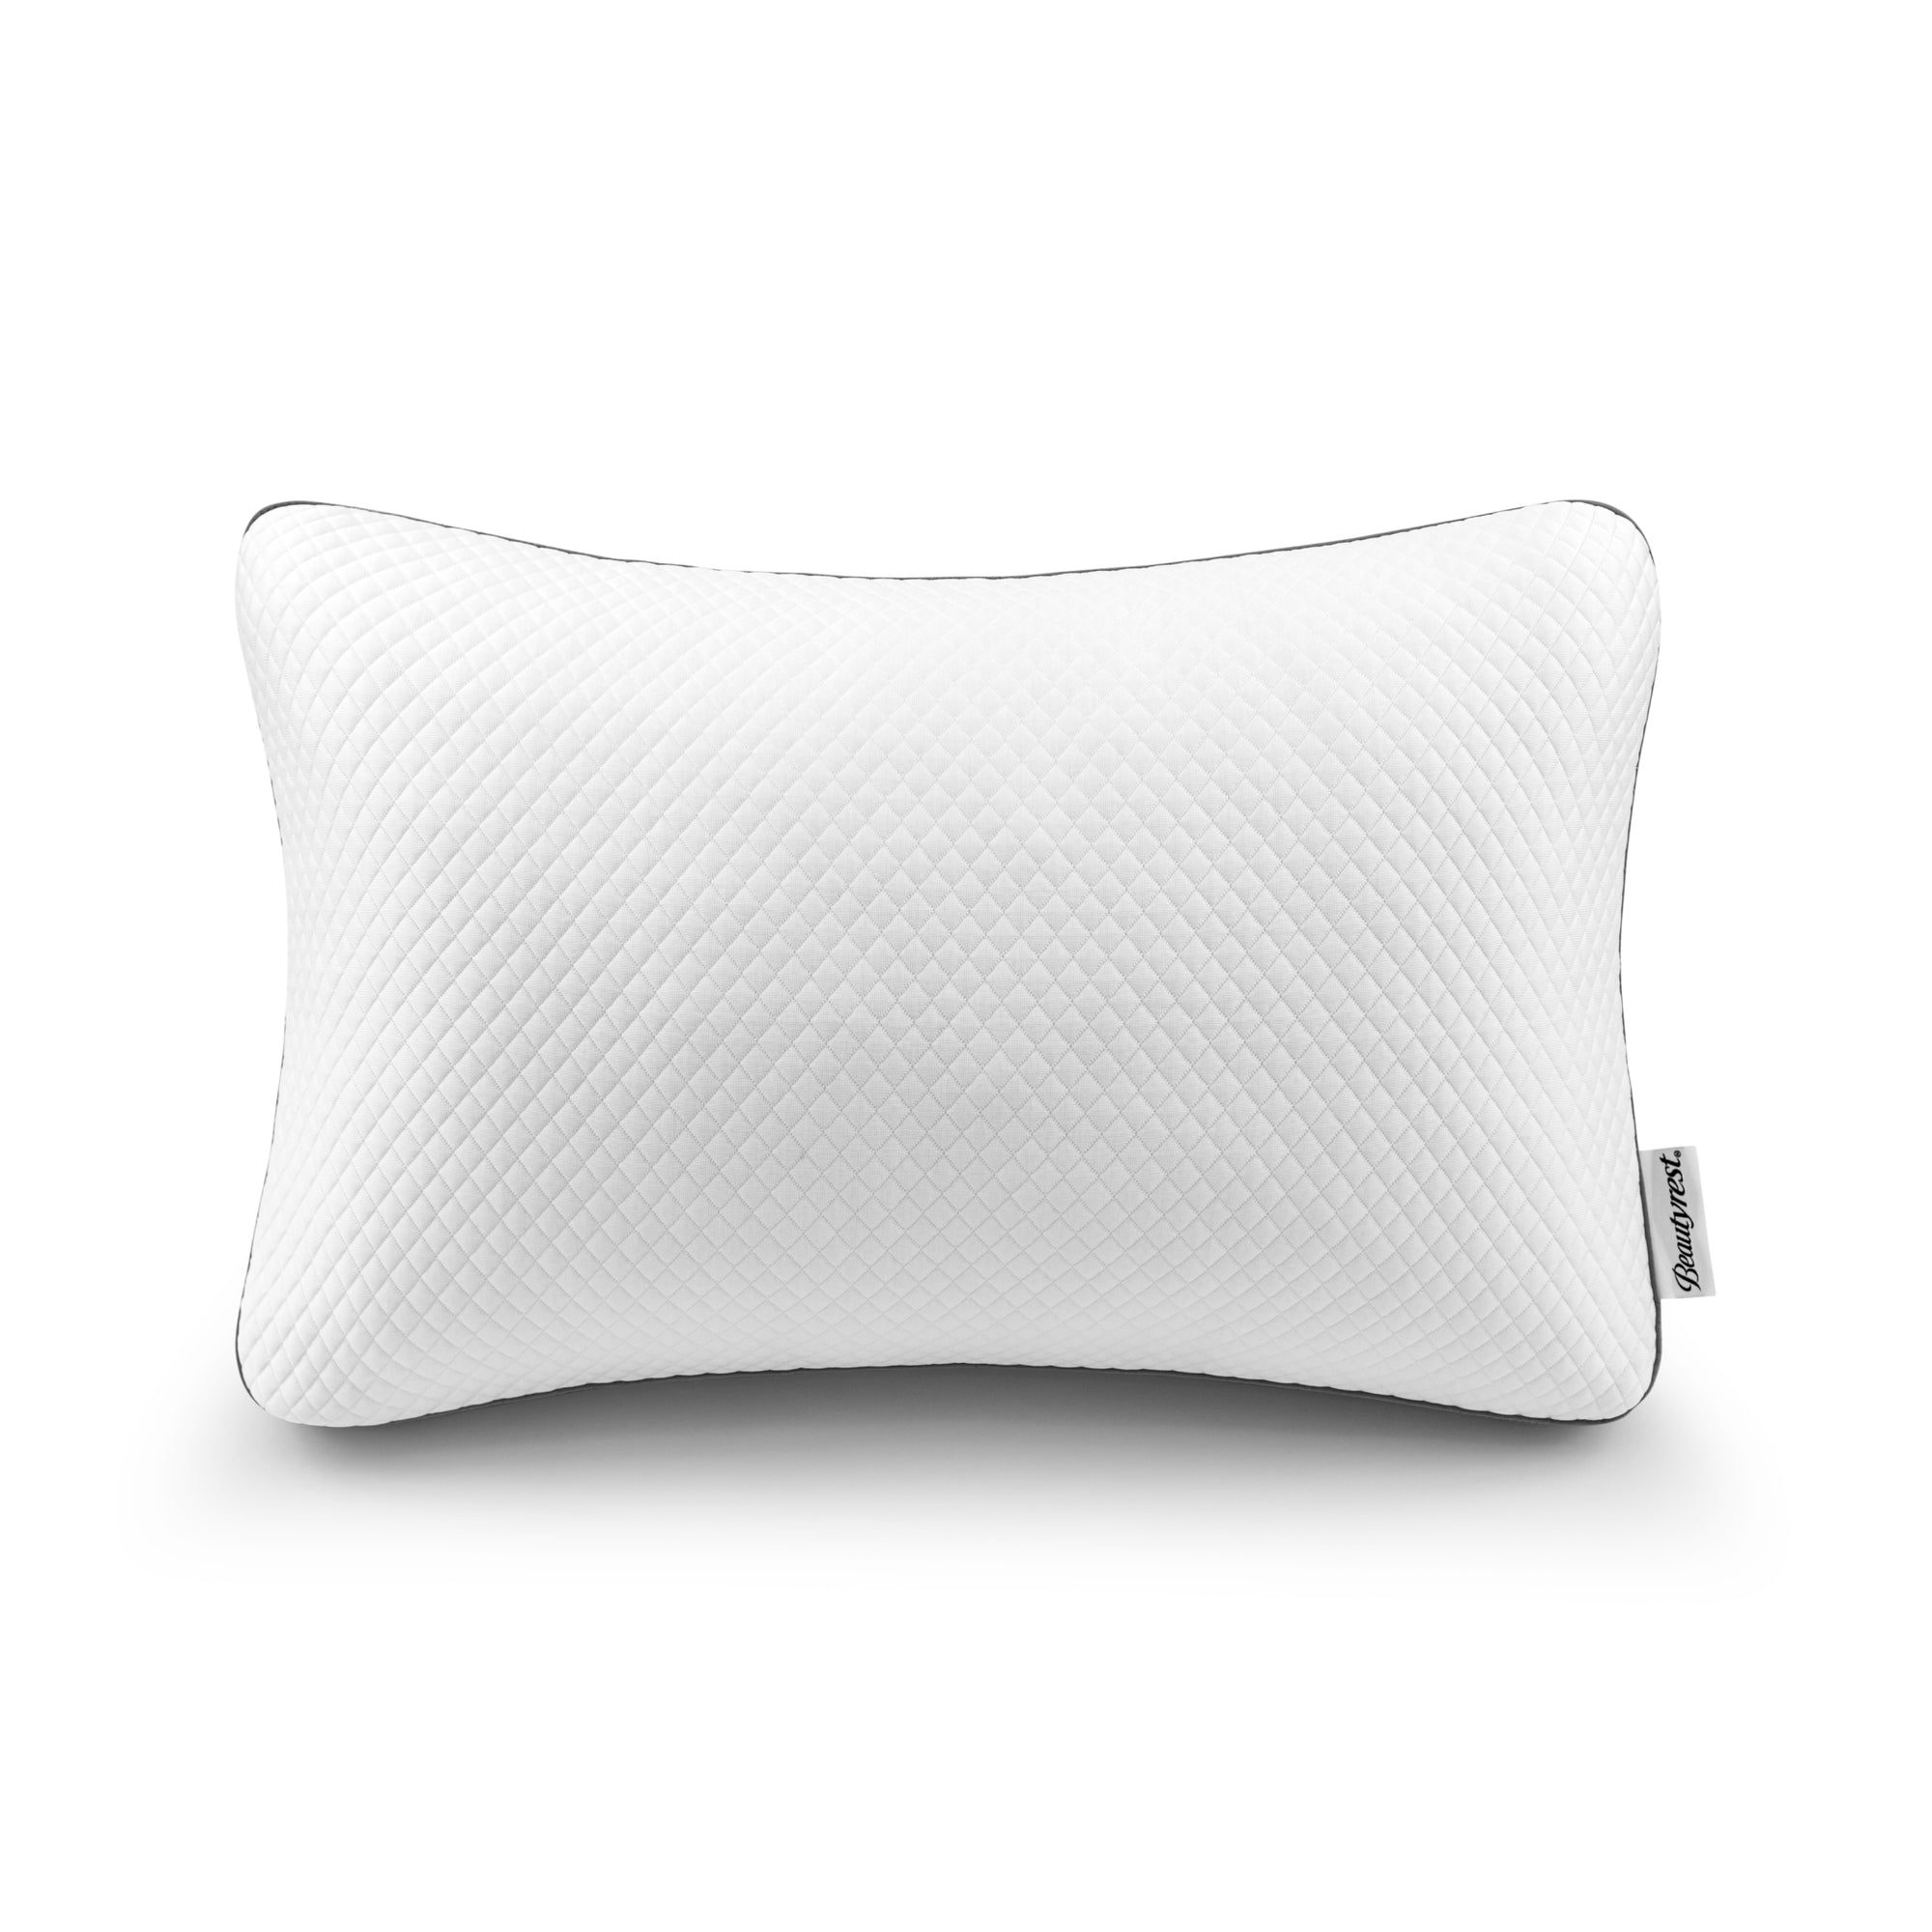 The Beautyrest Absolute Relaxation pillow on a white background